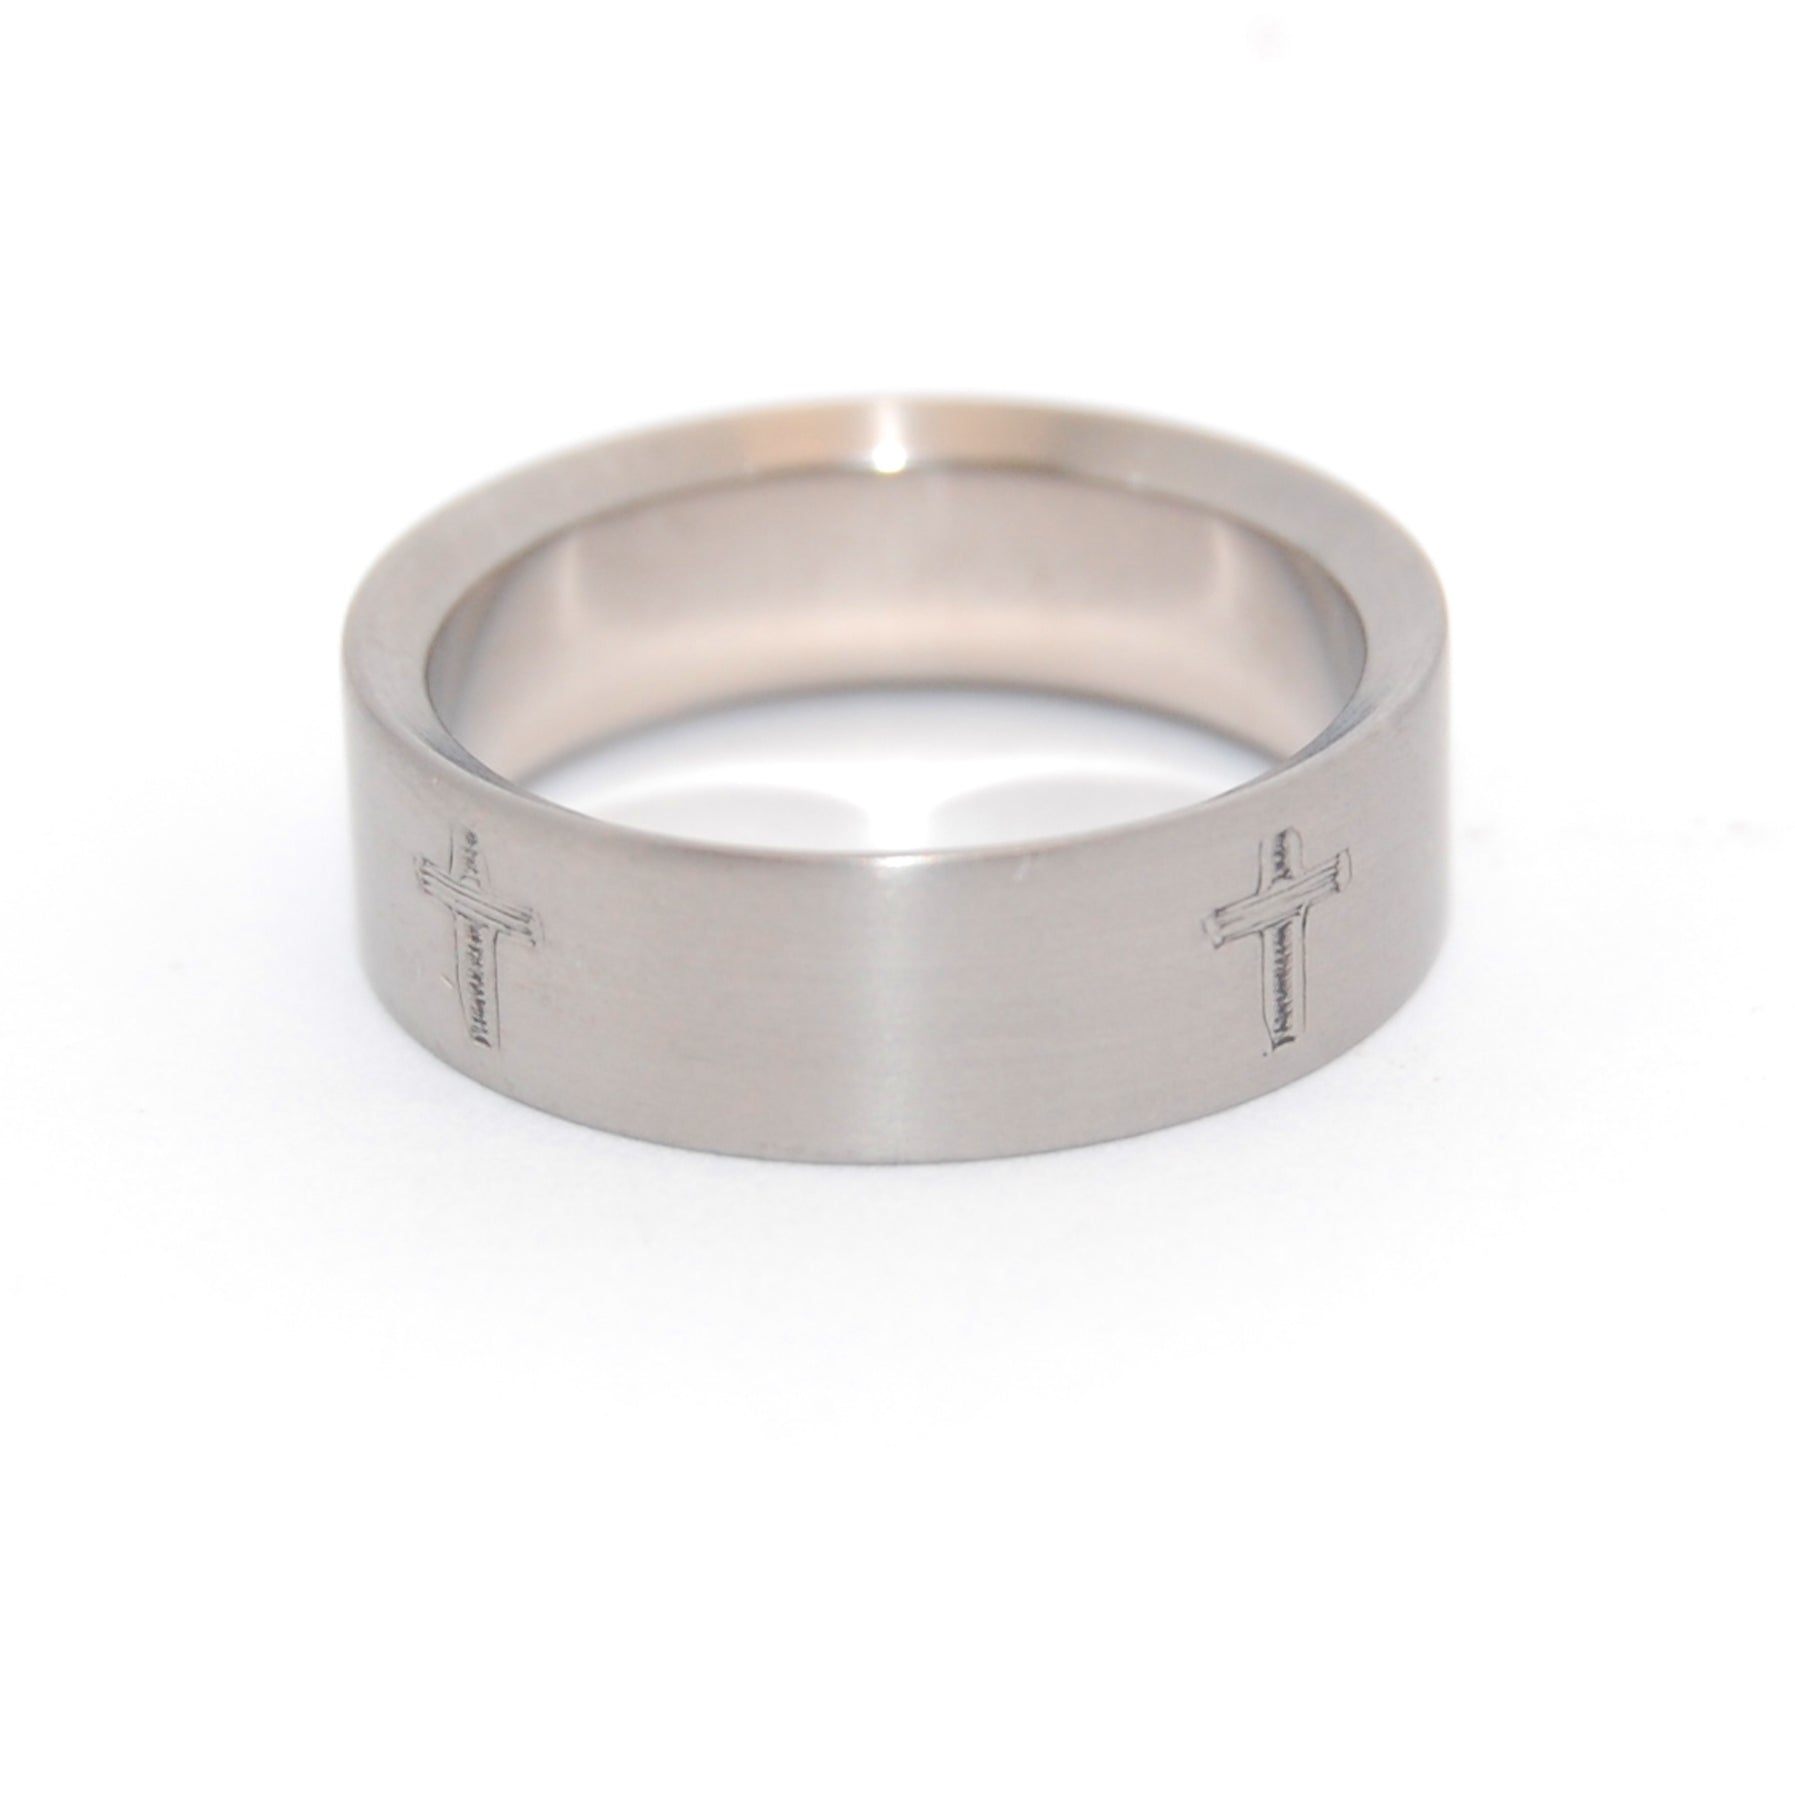 The Way, The Truth, and The Life | Engraved Titanium Wedding Ring - Minter and Richter Designs